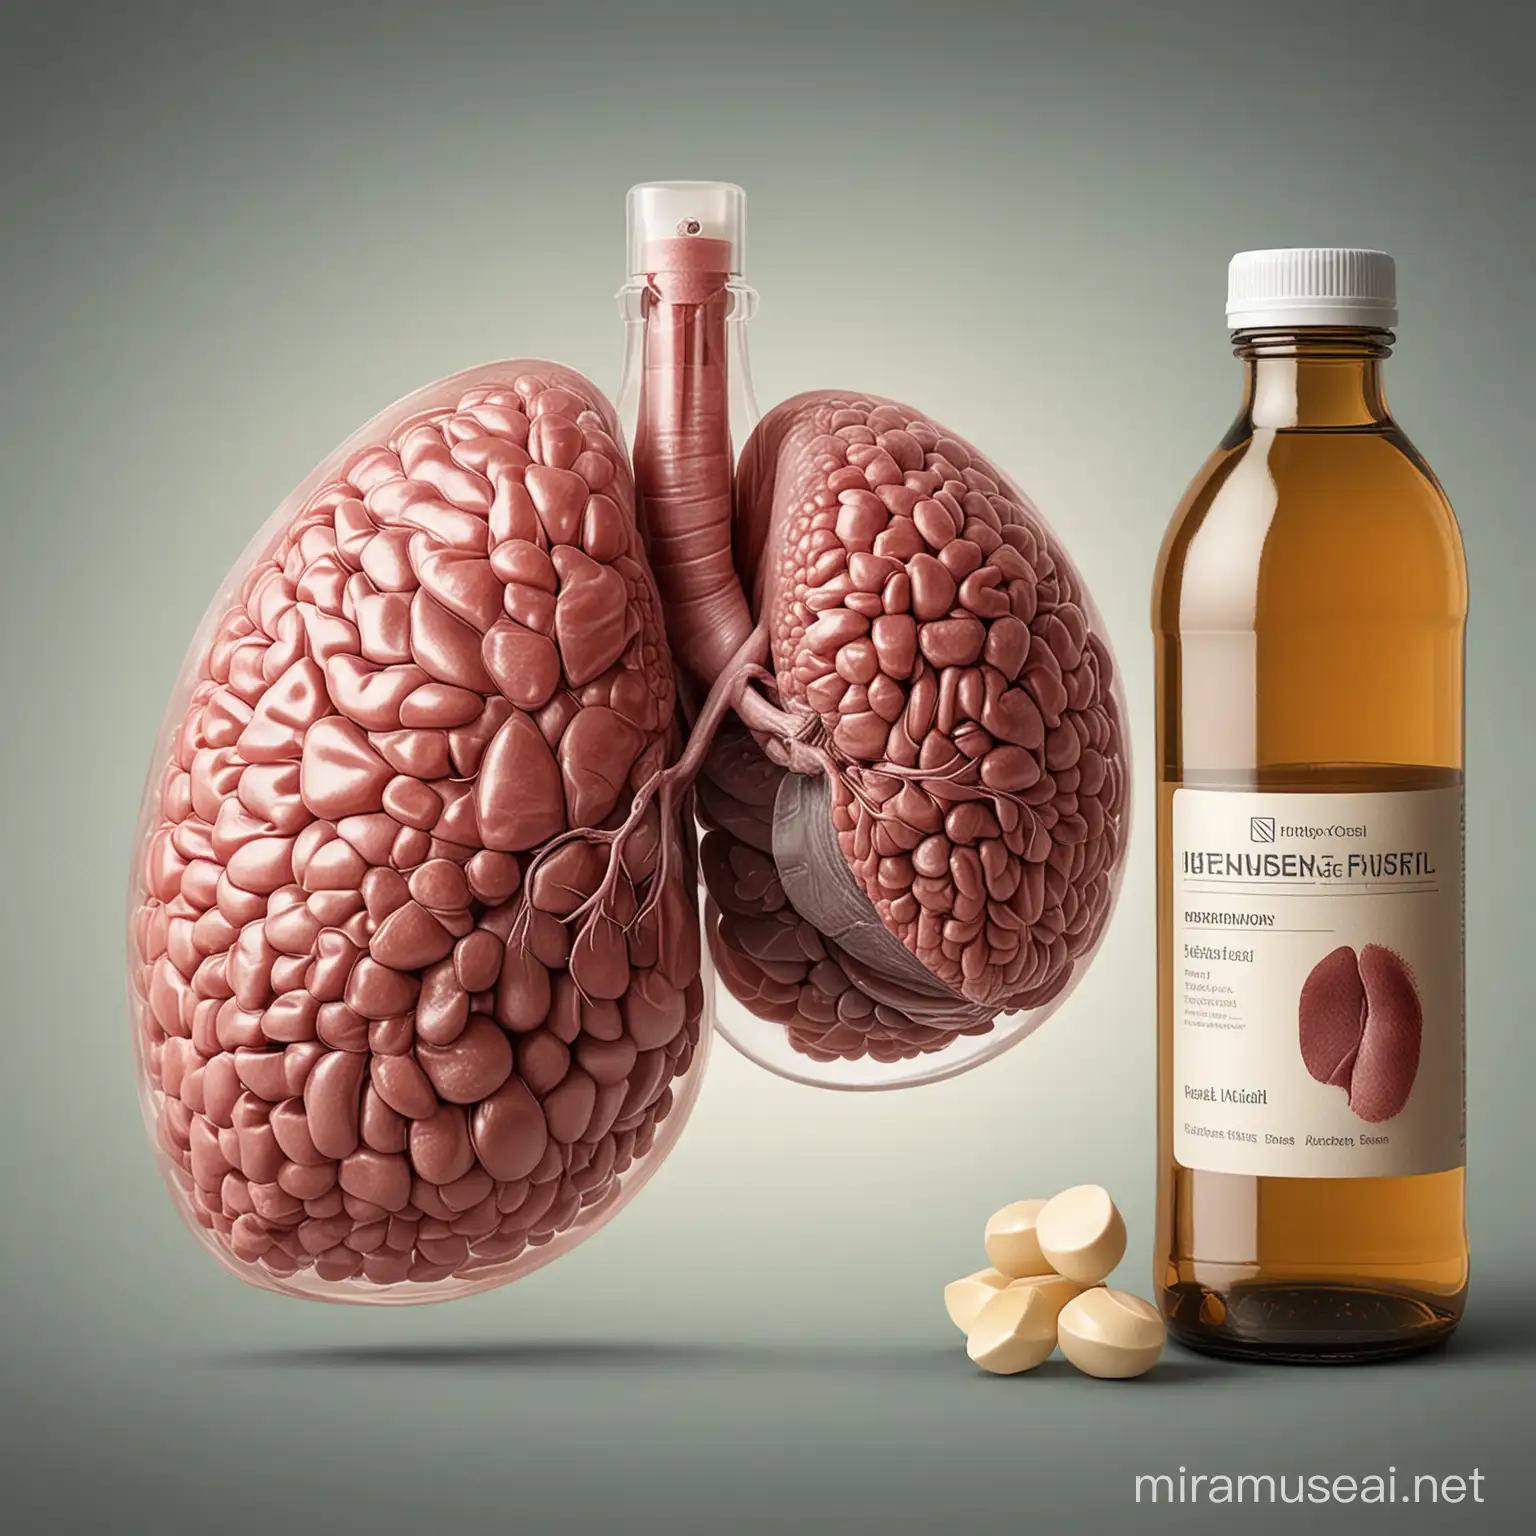 Healthful Liver Protection A Detailed Abdominal Organ Illustration with Nutraceutical Support